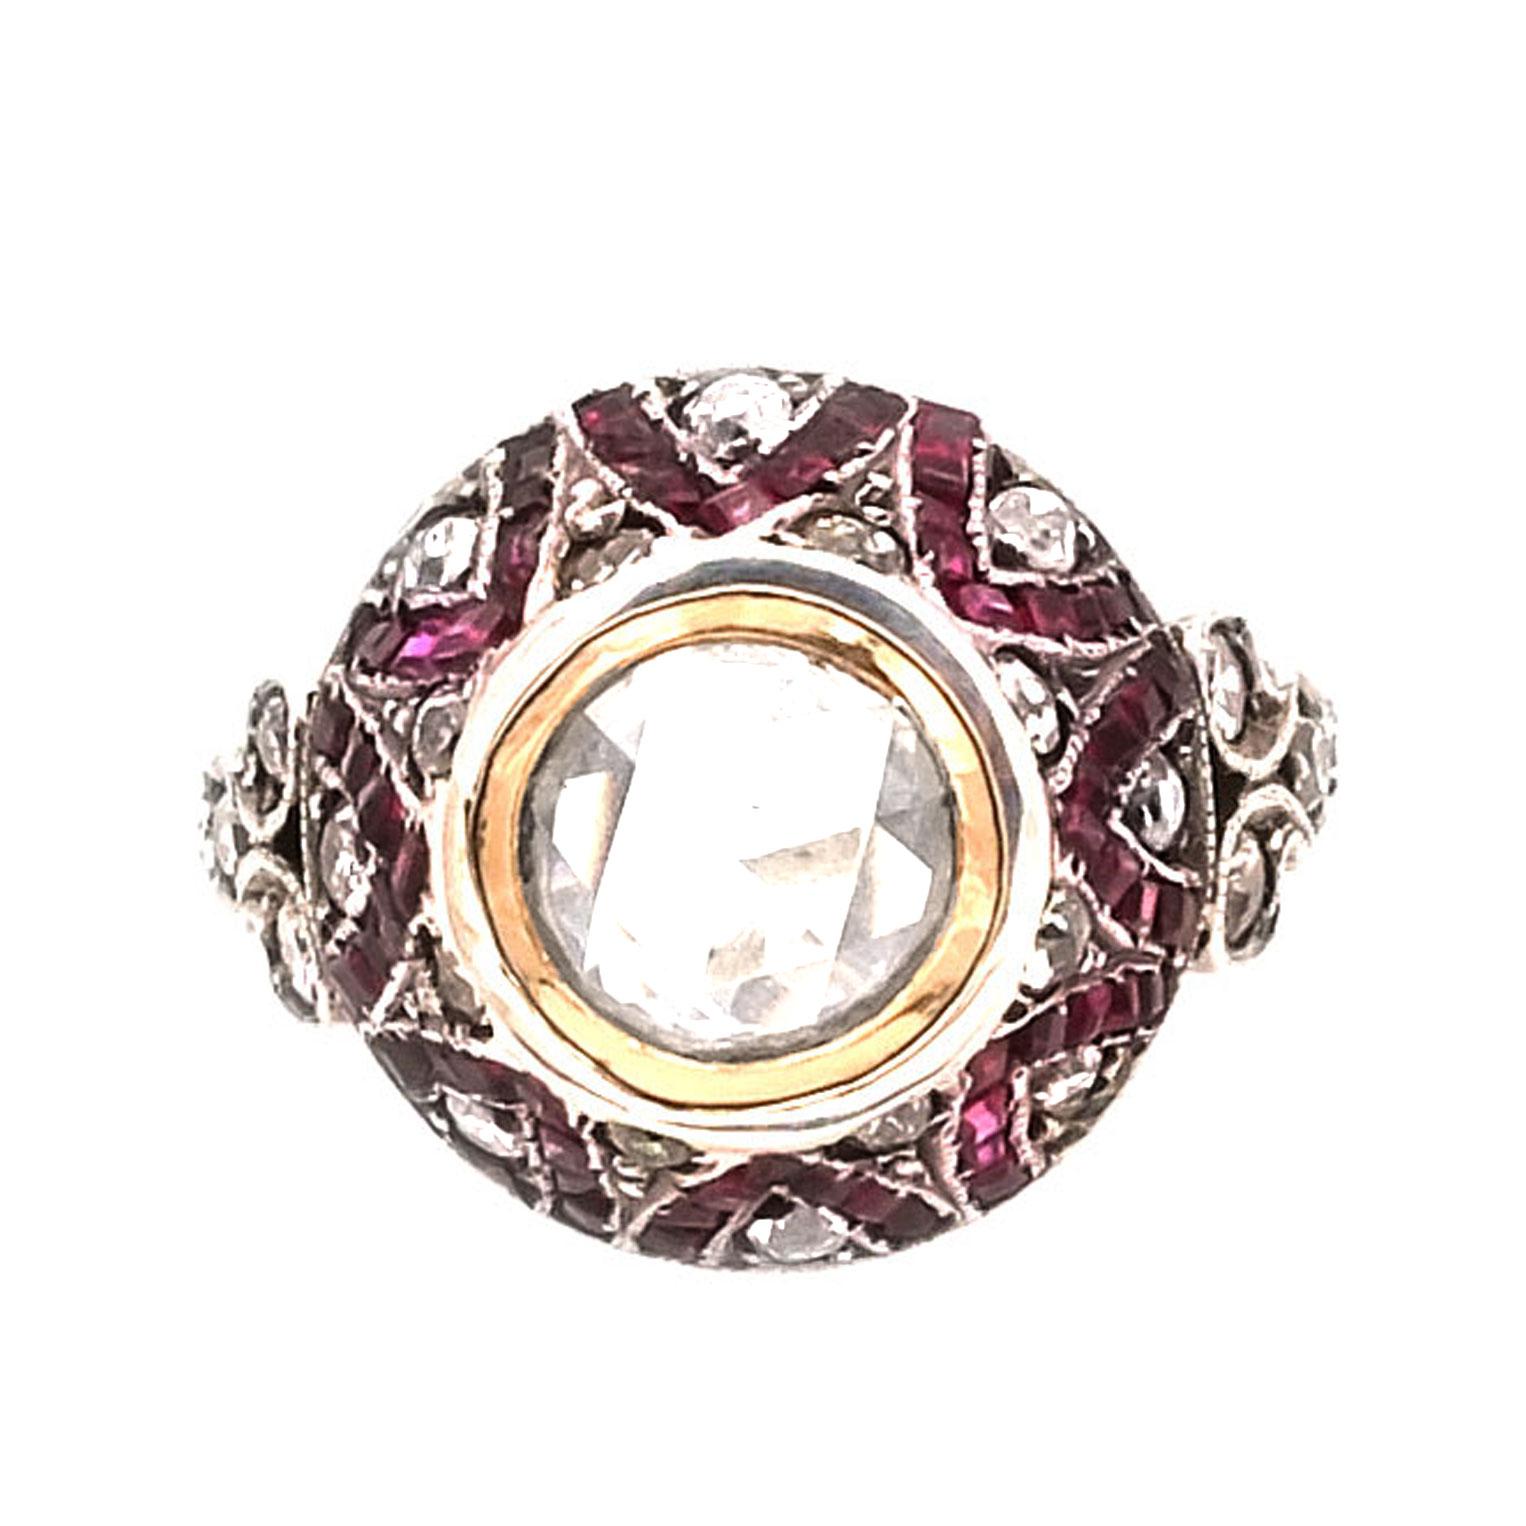 Art Deco 0.8 Carat Diamond Rose and Ruby Solitaire Ring, circa 1920

Attractive diamond ring set in the center with a shining diamond rose of 0.8 ct in a high bezel setting, which is pave set with rubies and diamond roses in an attractive zigzag